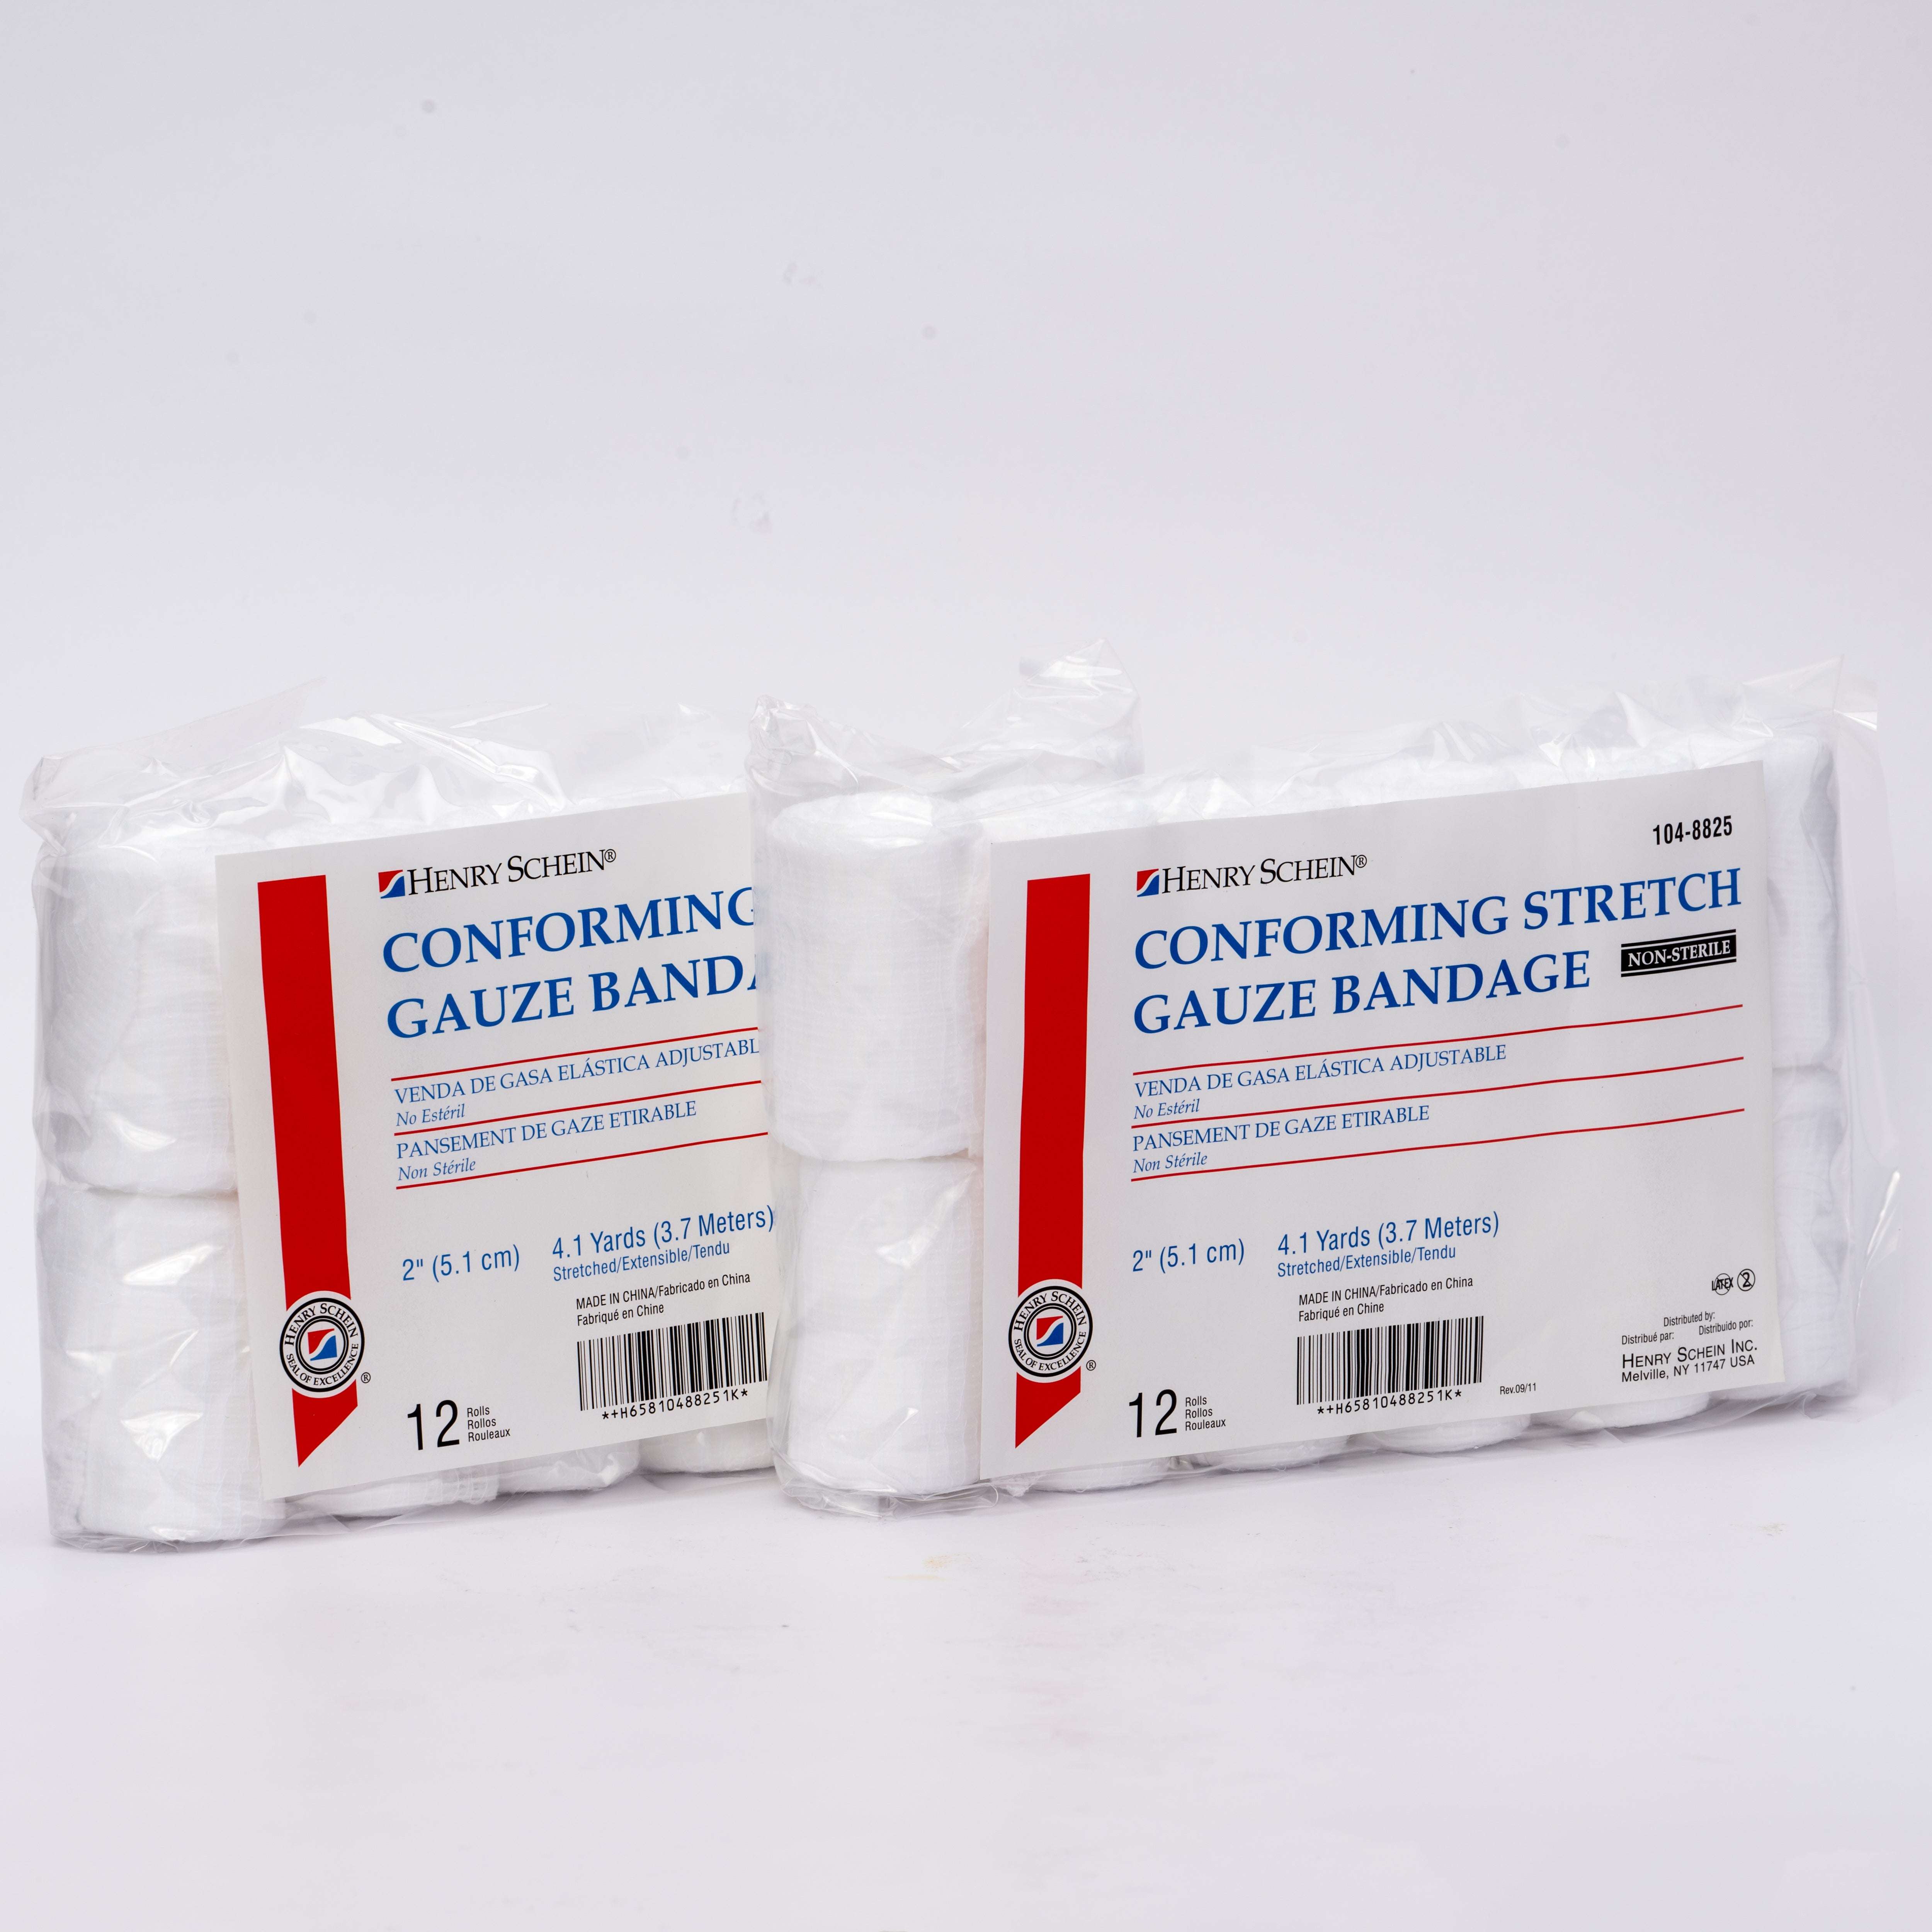 Henry Schein Conforming Stretch Gauze Bandage, 3" x 4.1 yards, Pack of 12, 8 ply, Non-Sterile